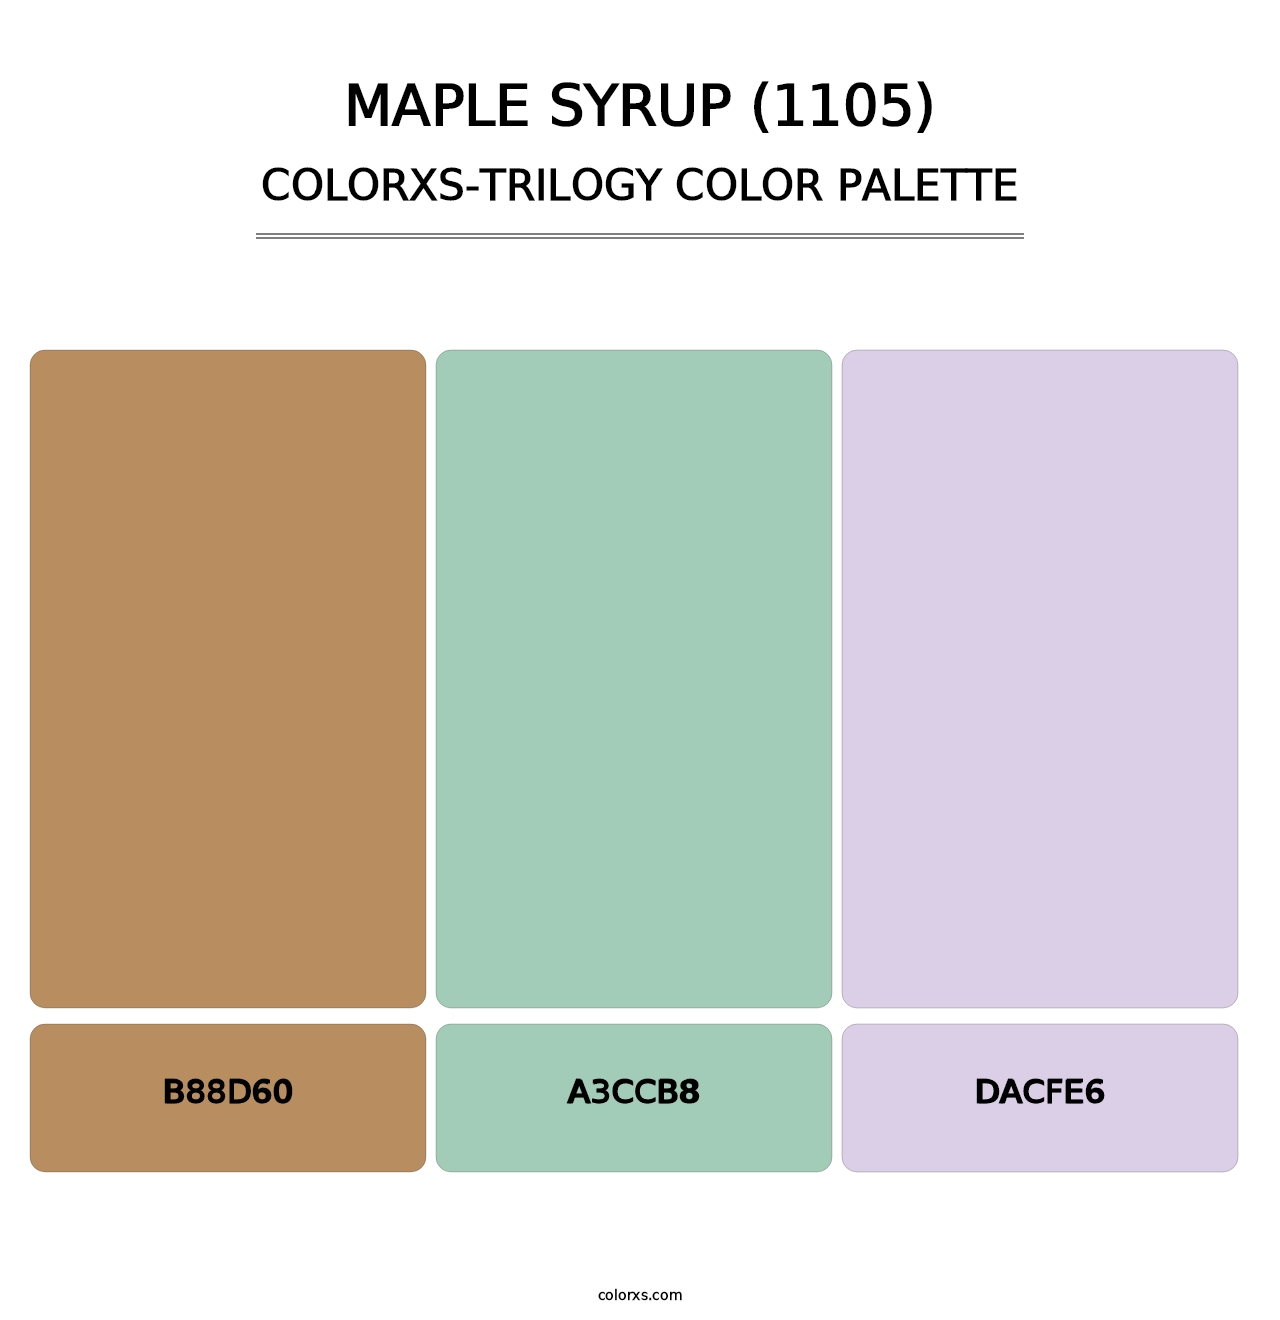 Maple Syrup (1105) - Colorxs Trilogy Palette